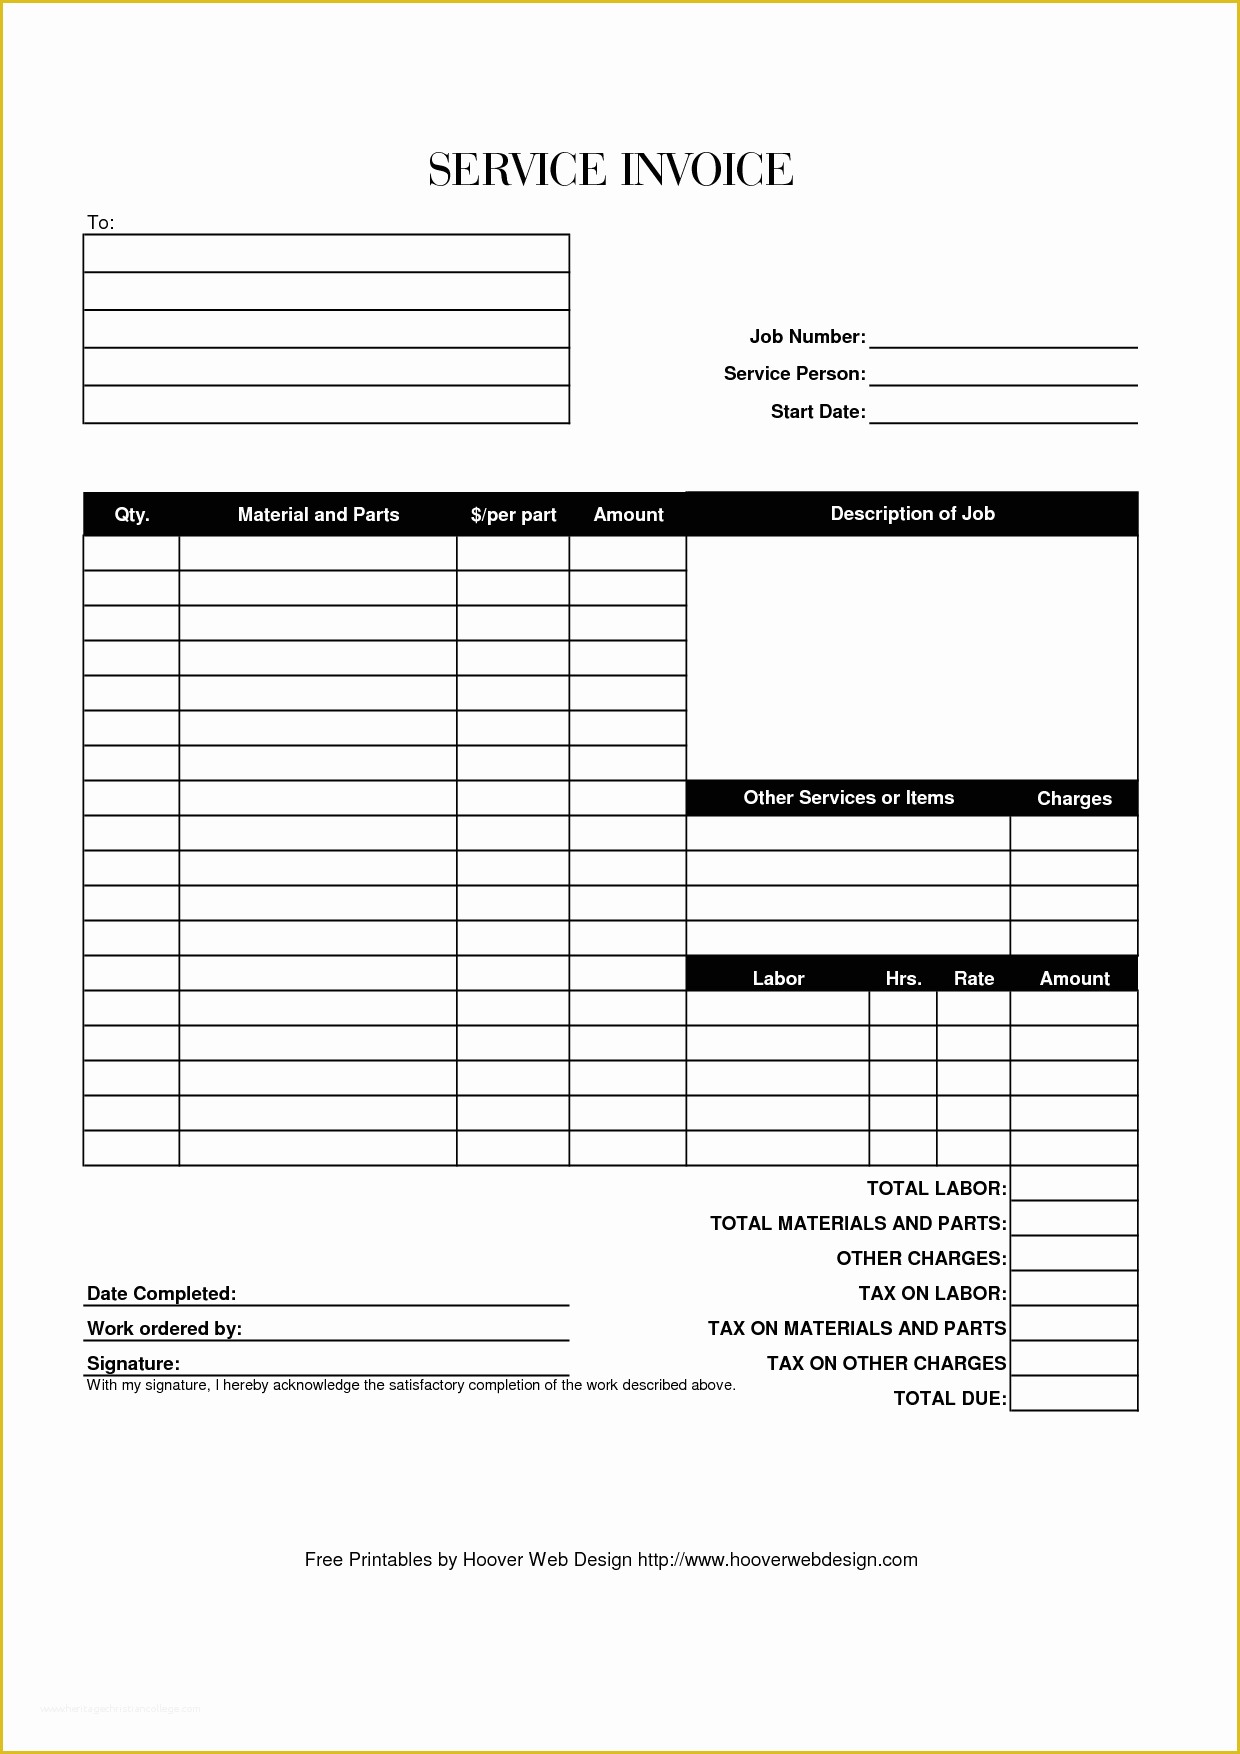 Free Bill Invoice Template Printable Of Hoover Receipts